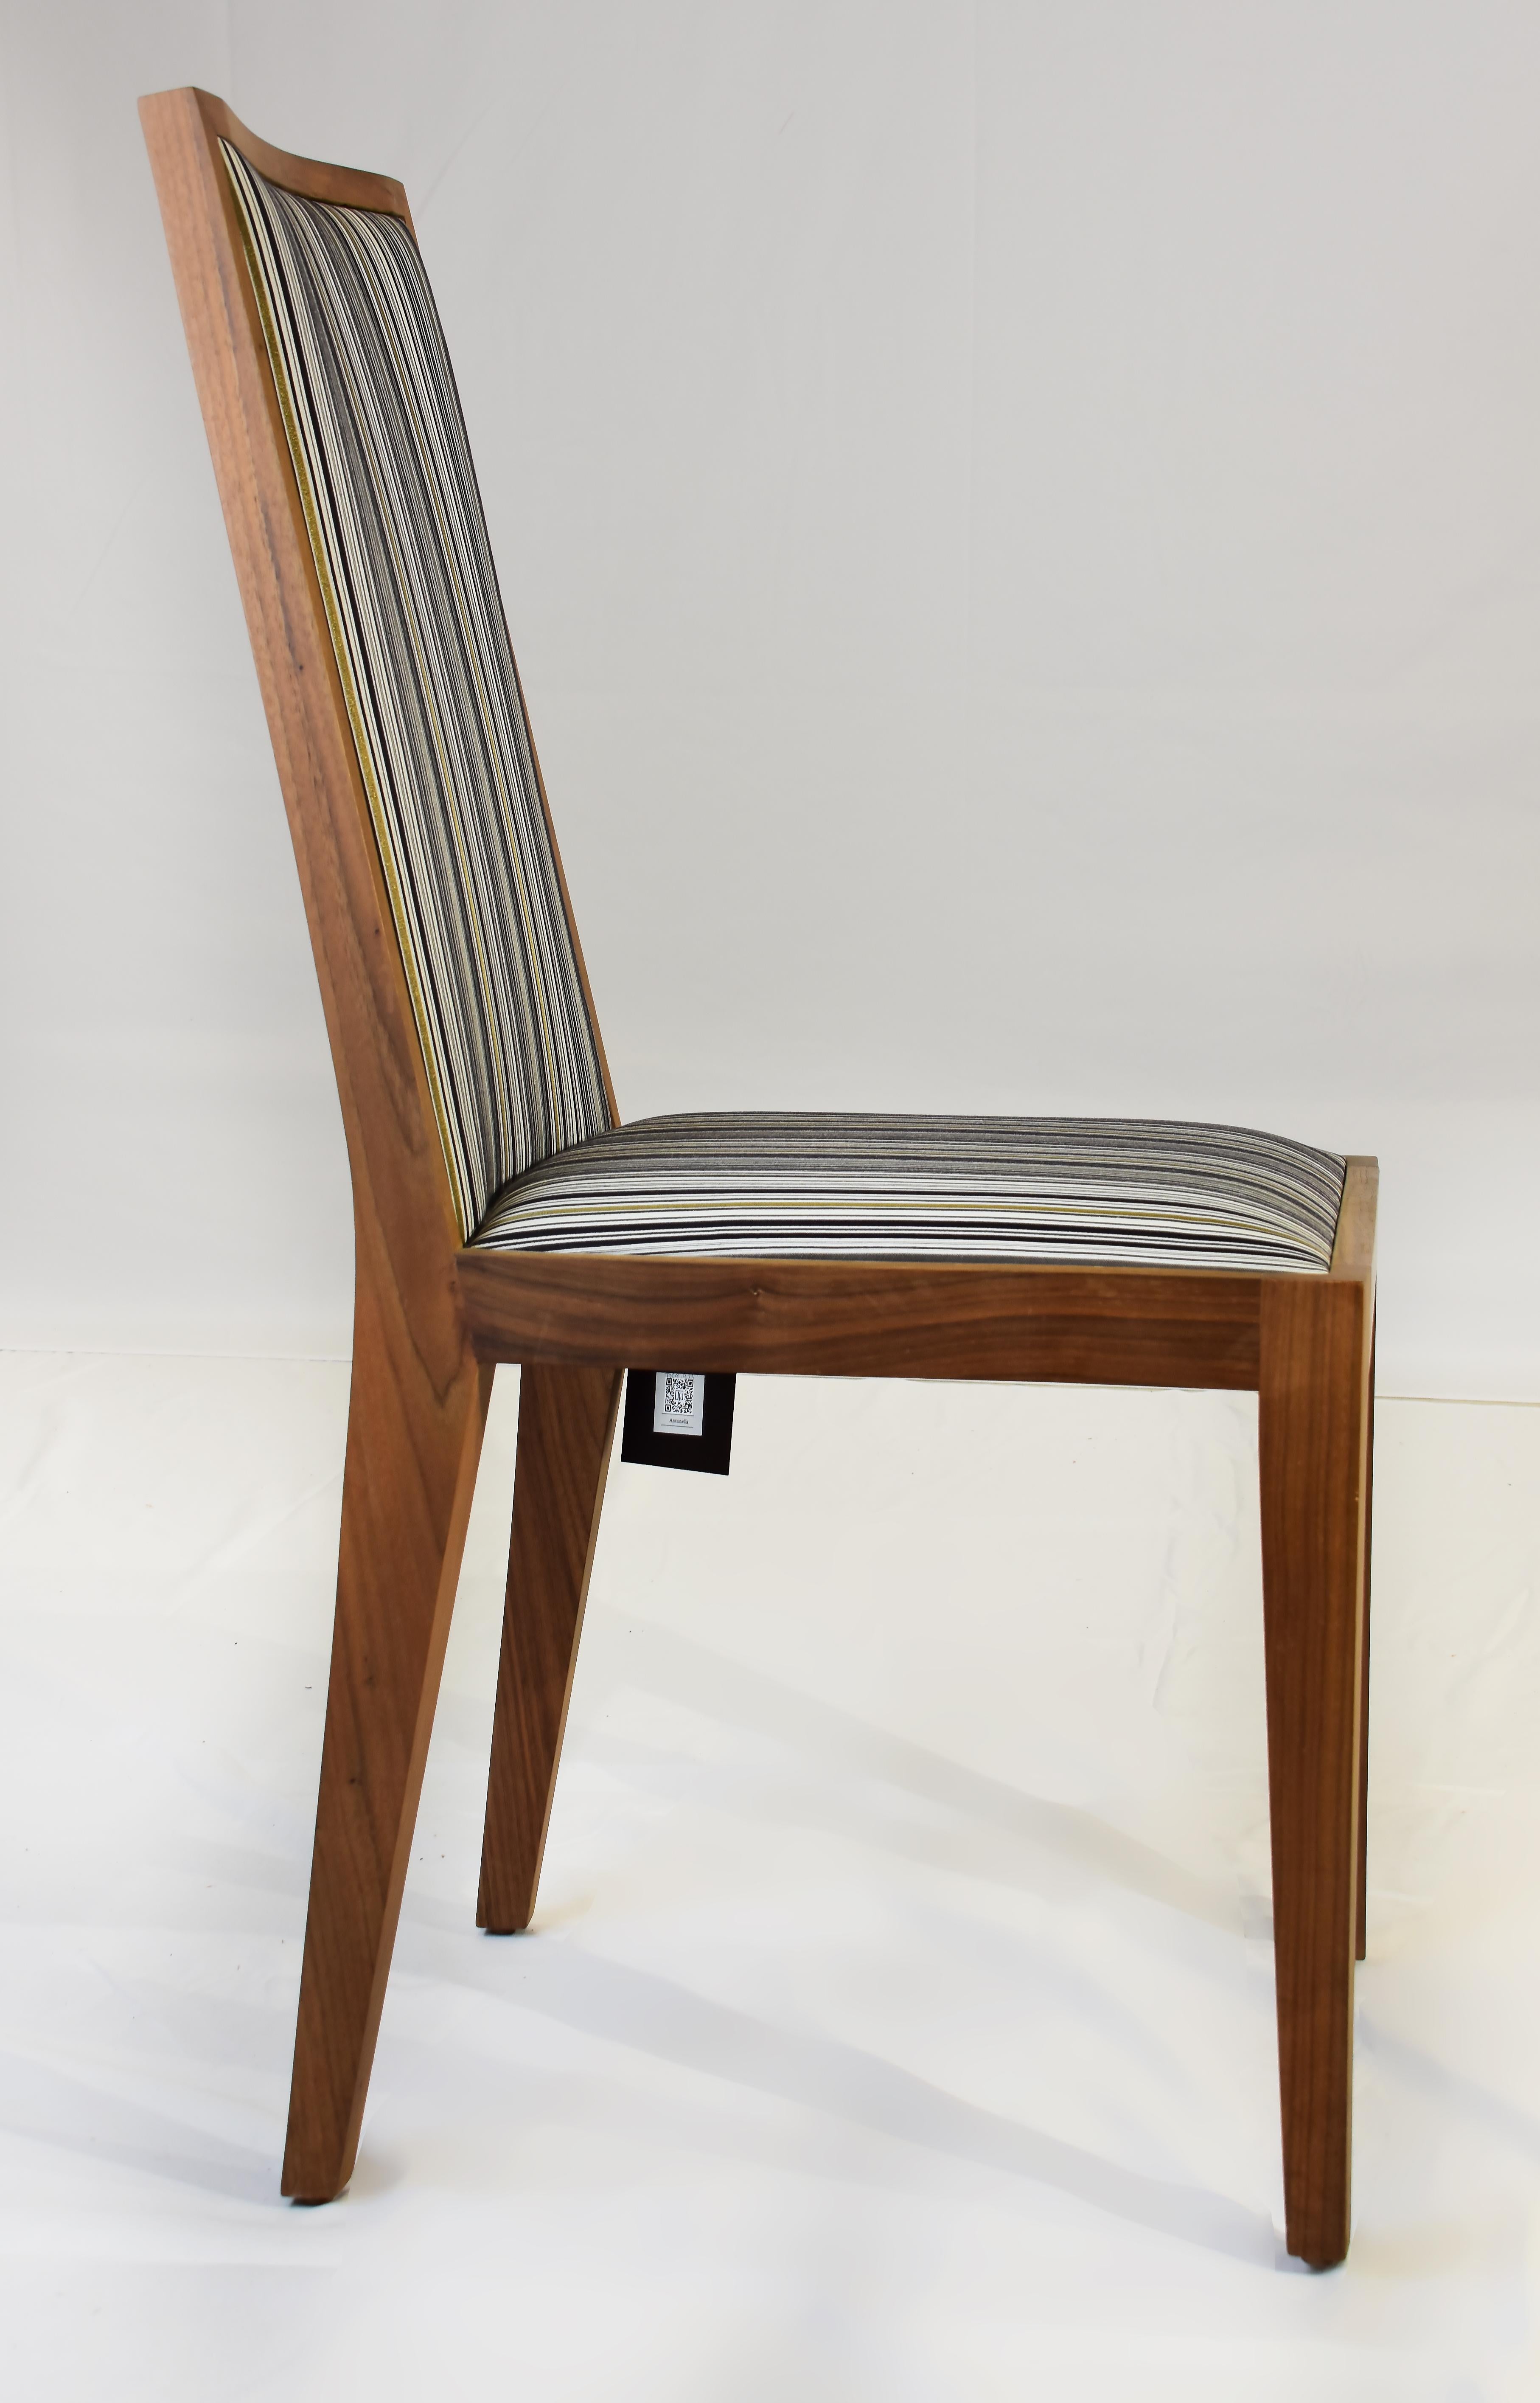 Le Jeune Upholstery Antonella Walnut  Dining Chair Showroom Model In Good Condition For Sale In Miami, FL